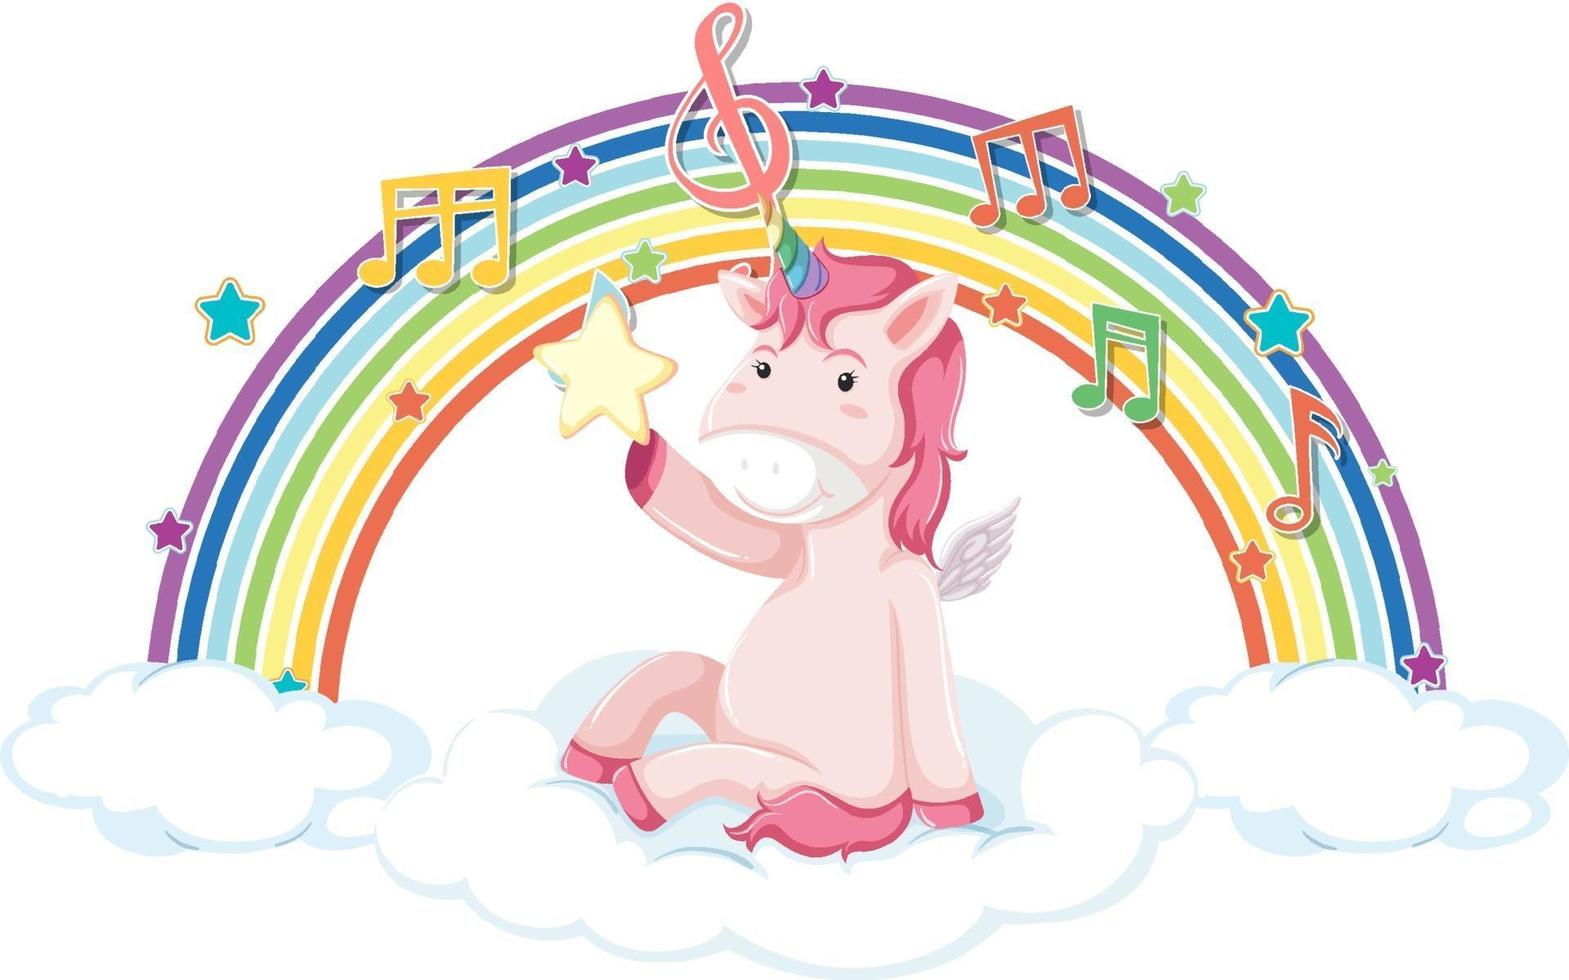 Unicorn sitting on cloud with rainbow and melody symbol vector